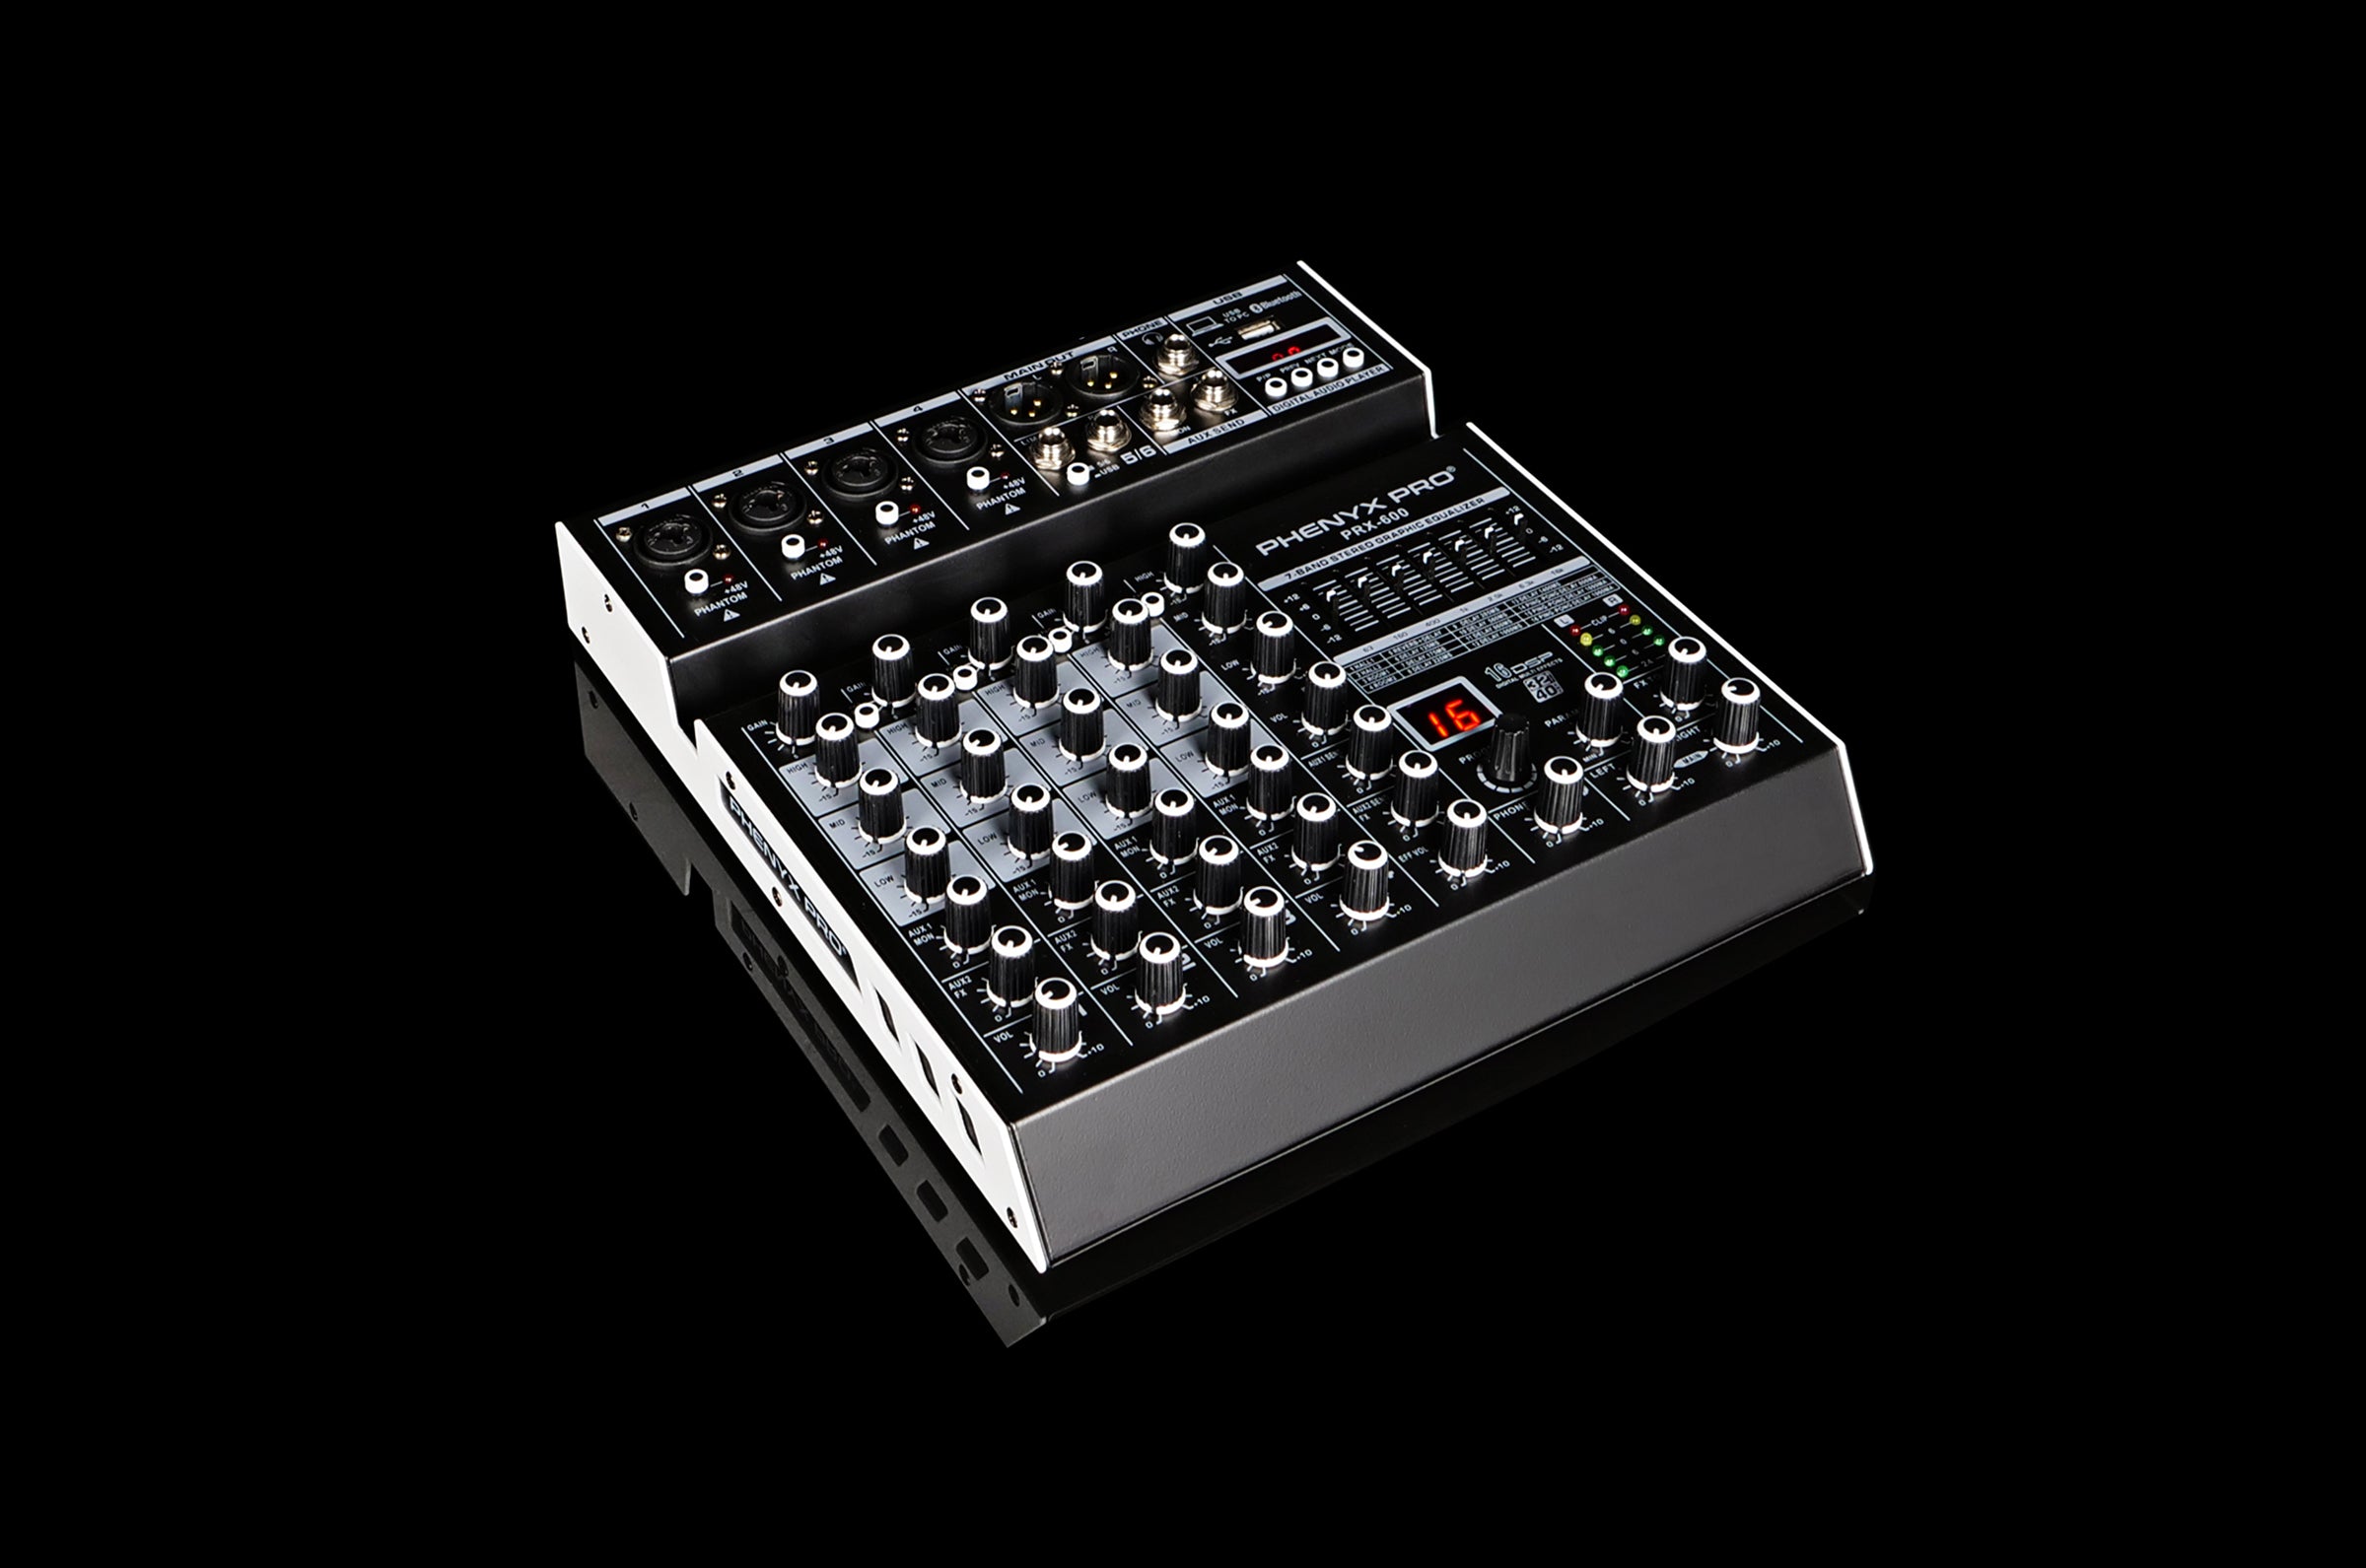 How to Use PC Function for the PRX-600 Mixer